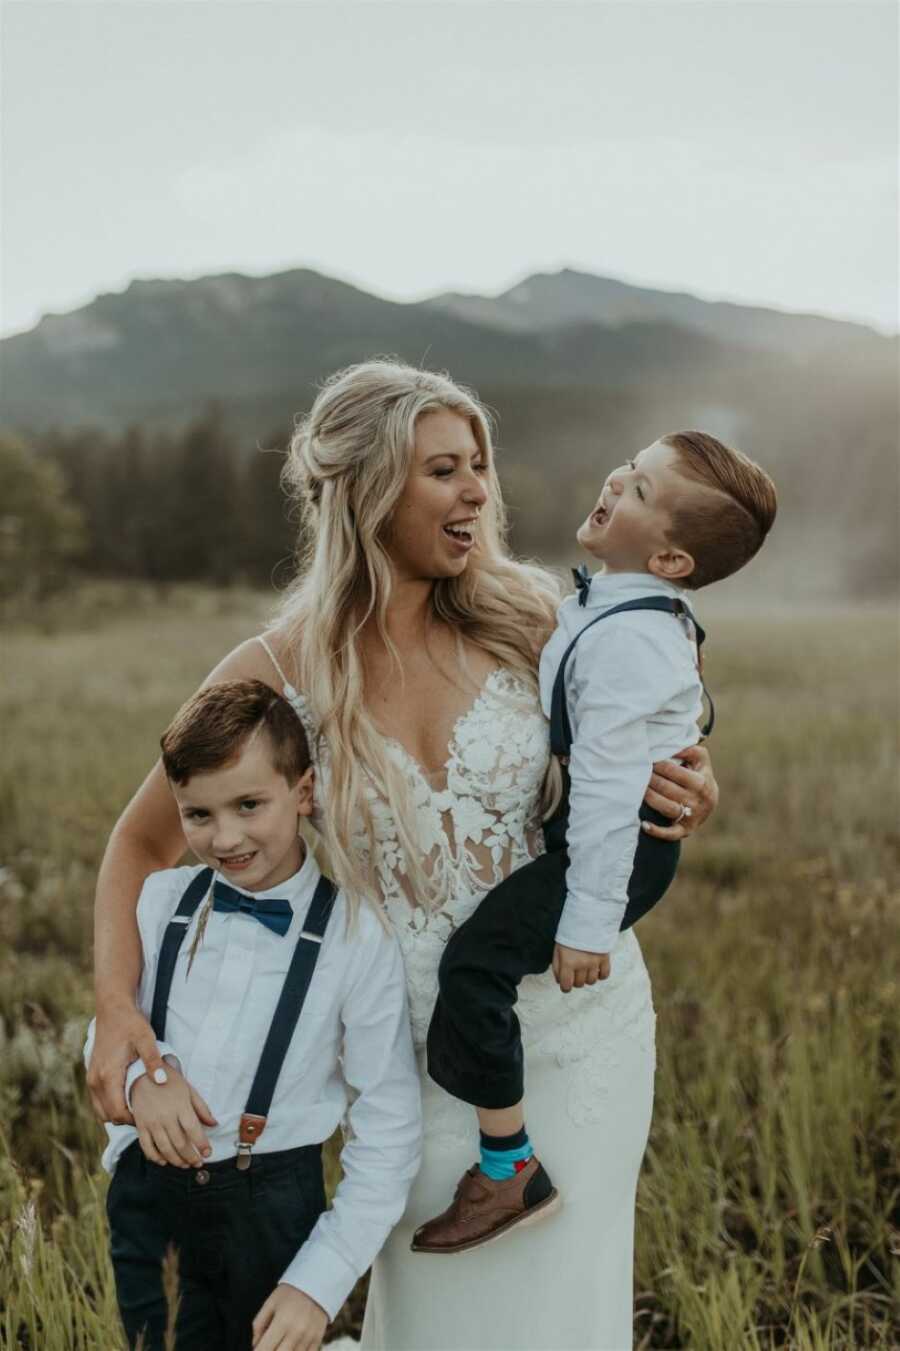 Stepmom takes candid photo with her two stepsons on her wedding day